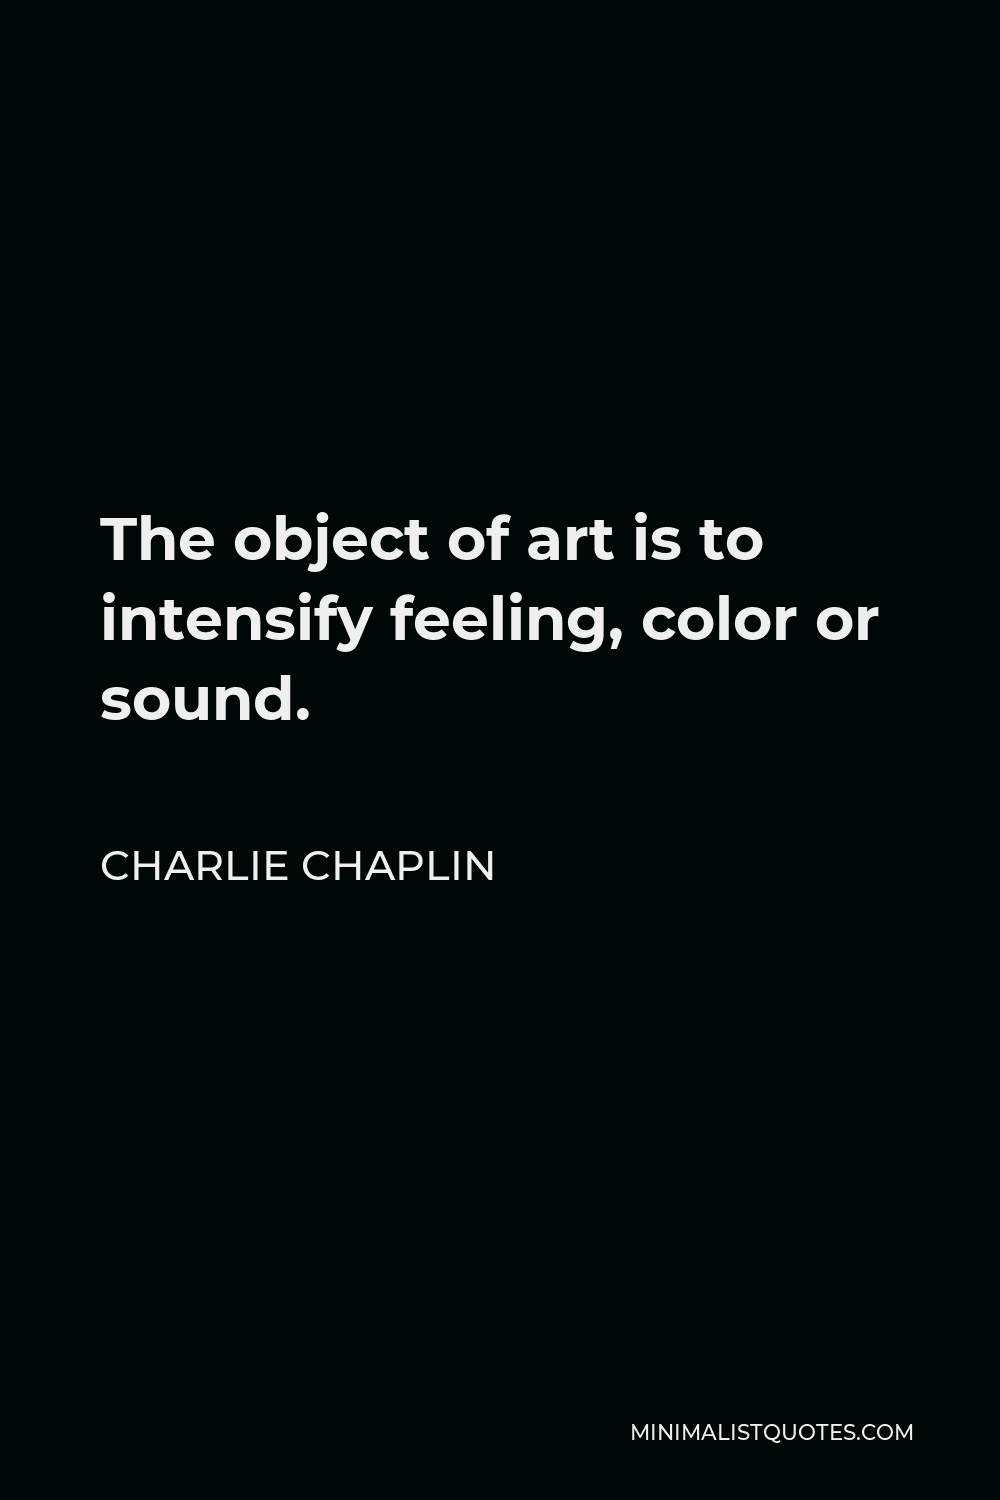 Charlie Chaplin Quote - The object of art is to intensify feeling, color or sound.